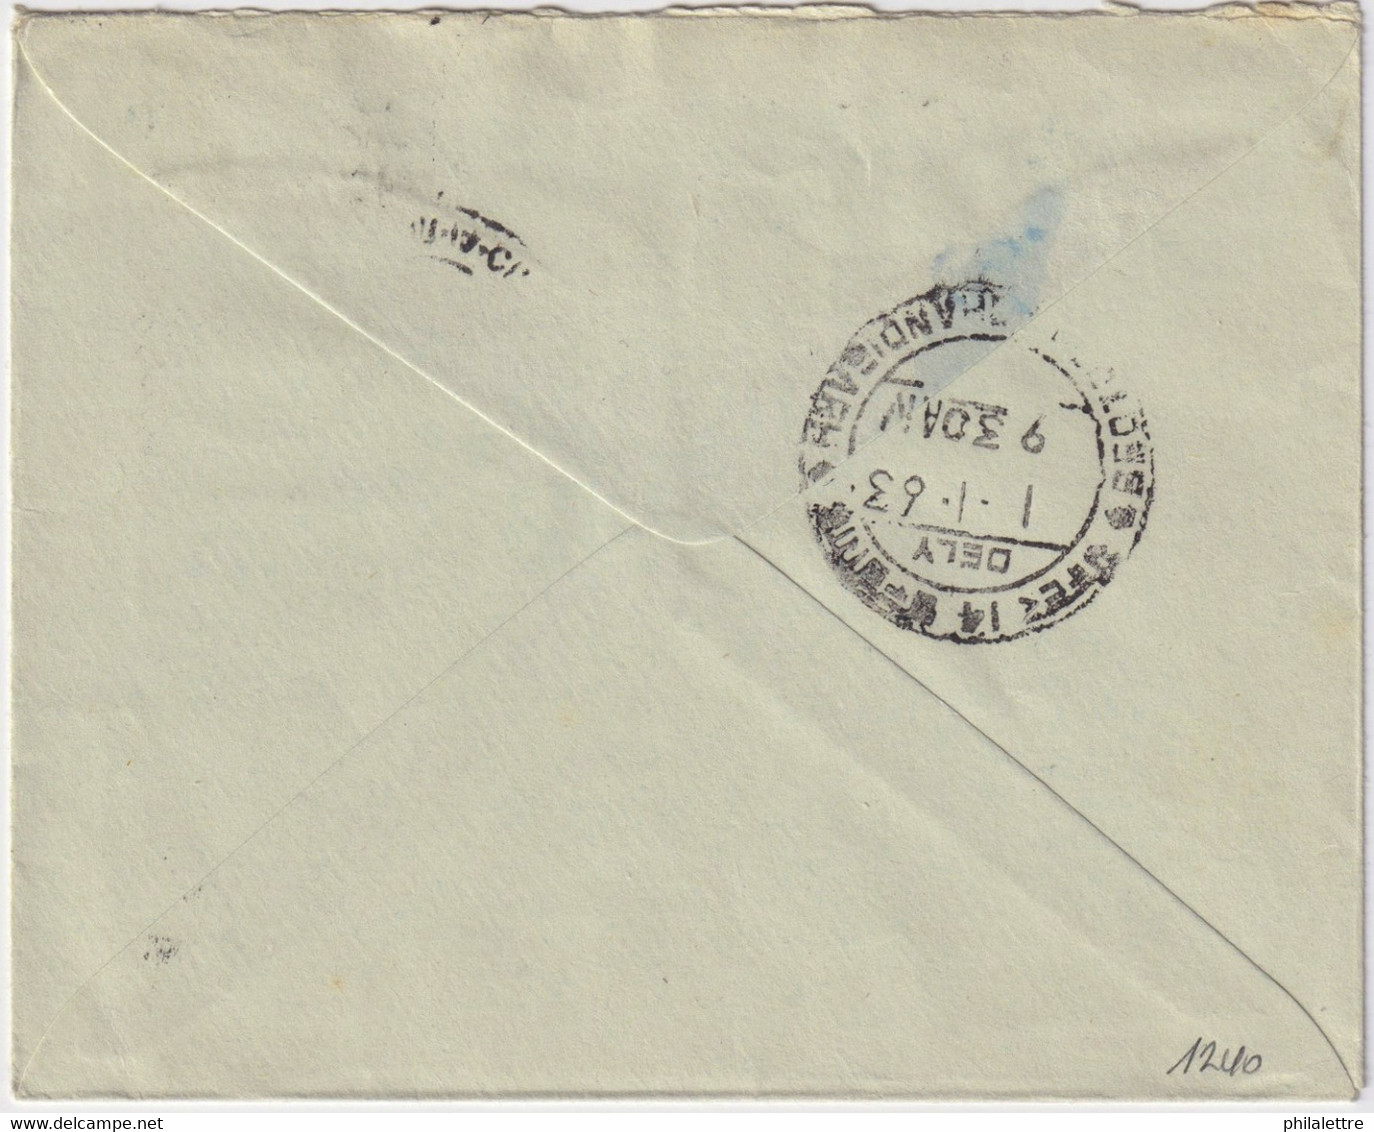 INDE / INDIA - 1962 - Fine Postal Envelope Used Locally In CHANDIGARH - Sobres